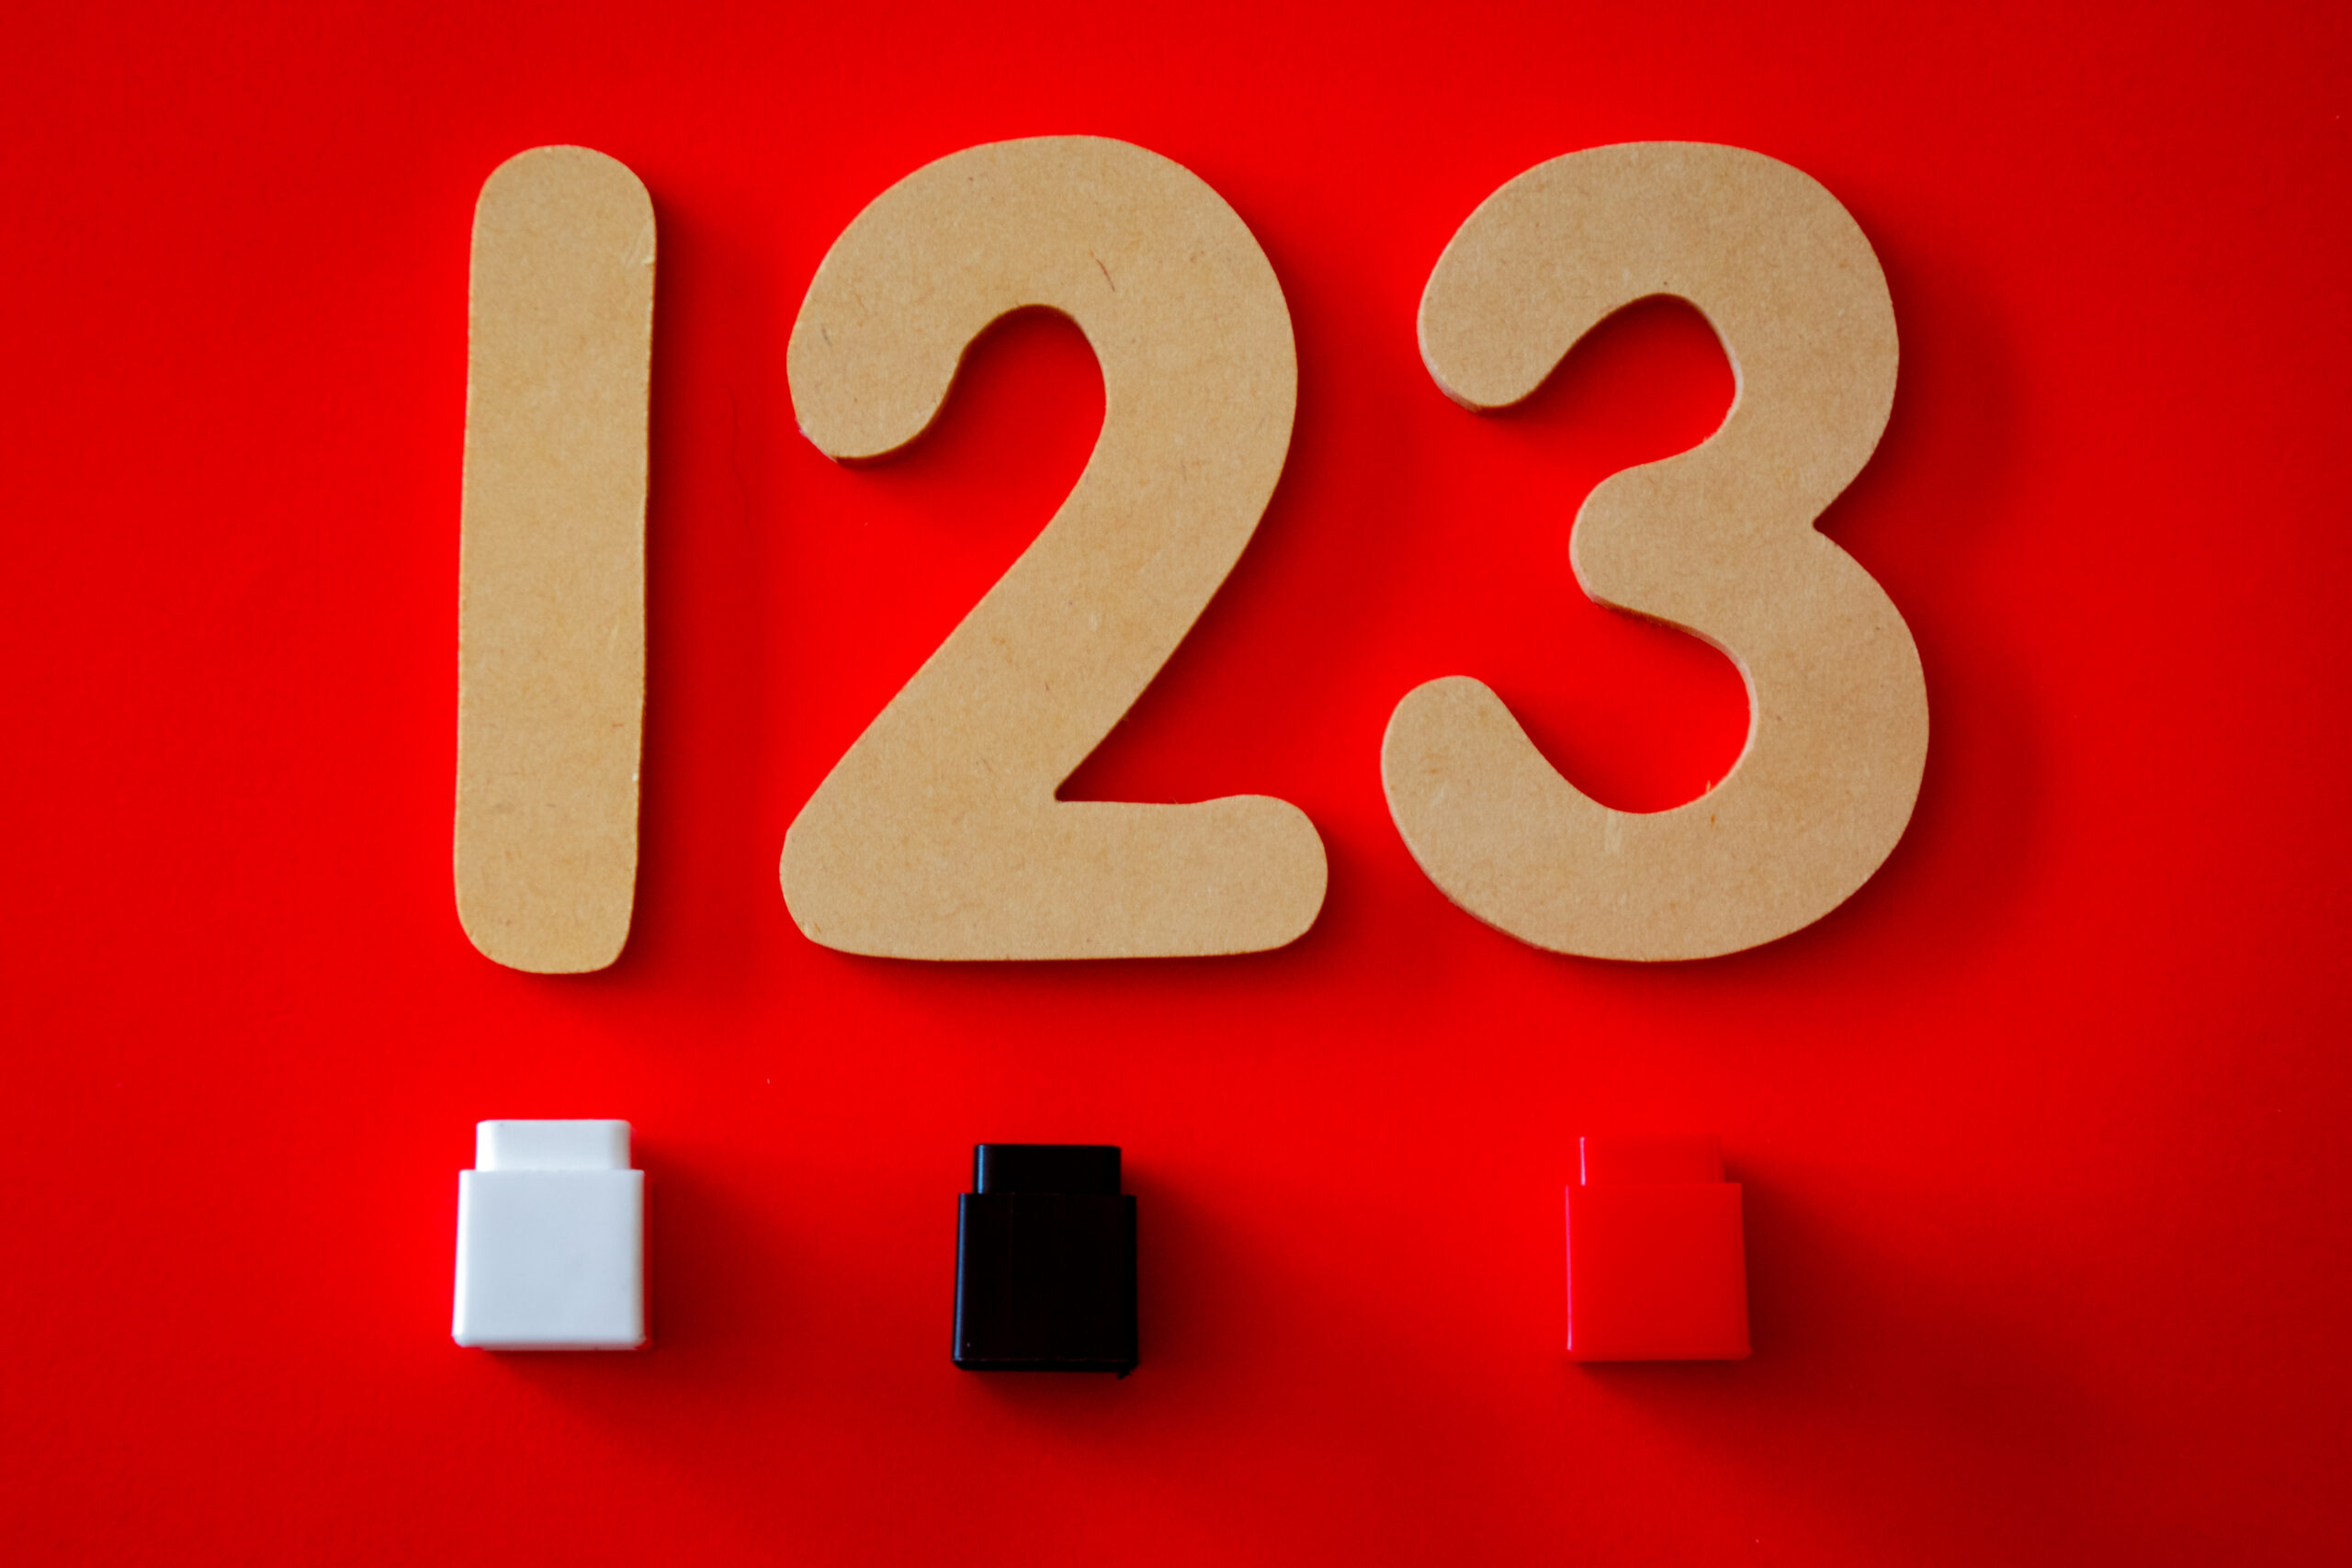 123 cutout decor on red surface